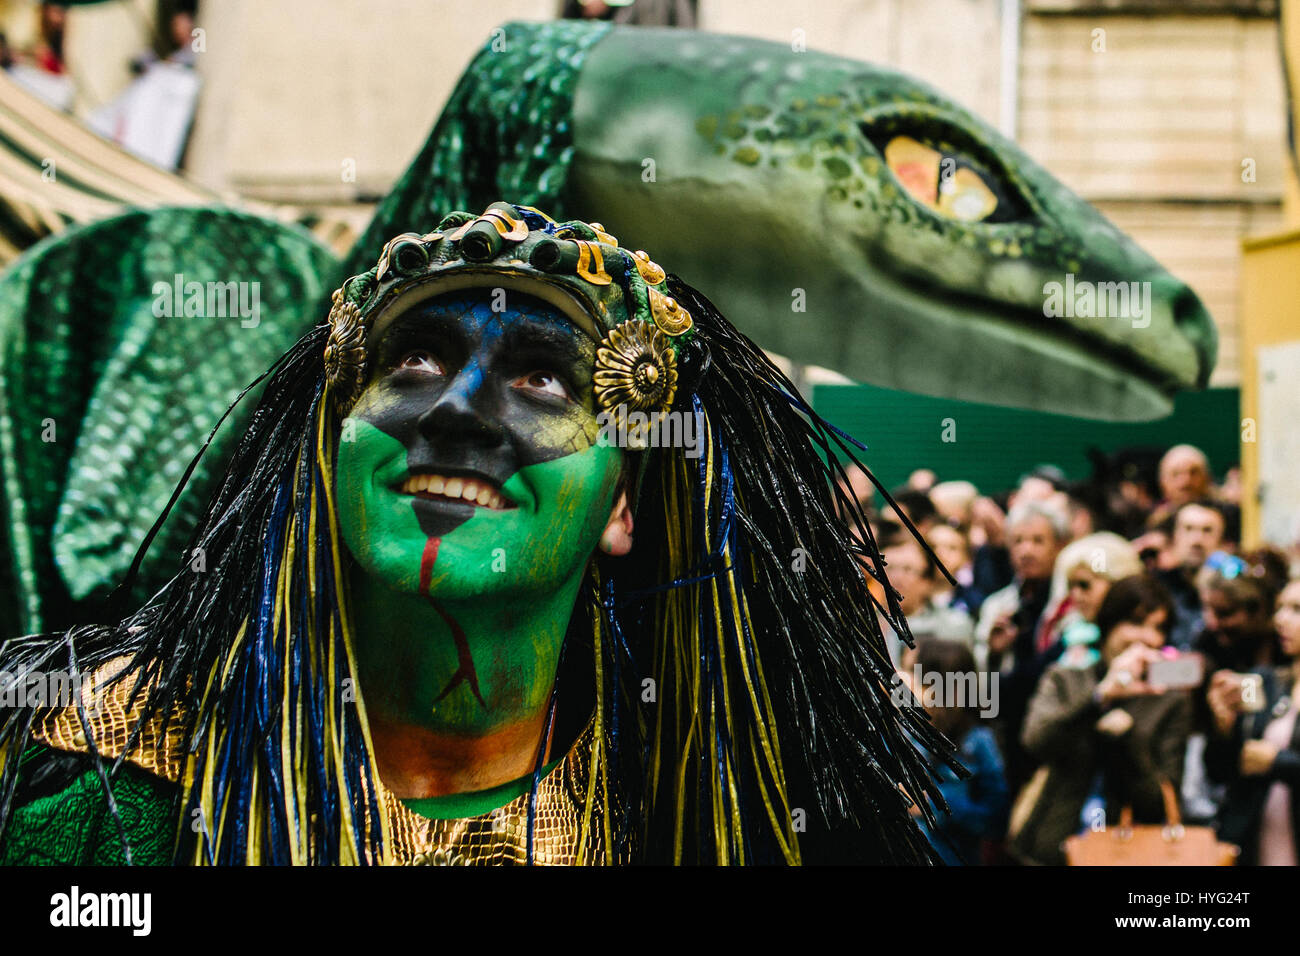 ALCOI, SPAIN: A snake man smiles at the crowd. THE FLAMBOYANT festival that relives Christians conquering Muslims in Spain has been captured this weekend. From armoured knights of the cross and fearsome eastern assassins to swordswomen and exotic-looking belly dancers, pictures show how the centuries-old festival still attracts thousands of enthusiastic revellers. Participants dressed in elaborate costumes in the Spanish town of Alcoi for the “Moros y Cristianos” festival, which recalls the 15th Century reconquest of the country by Christian armies from the Islamic Kingdom of Granada. Stock Photo